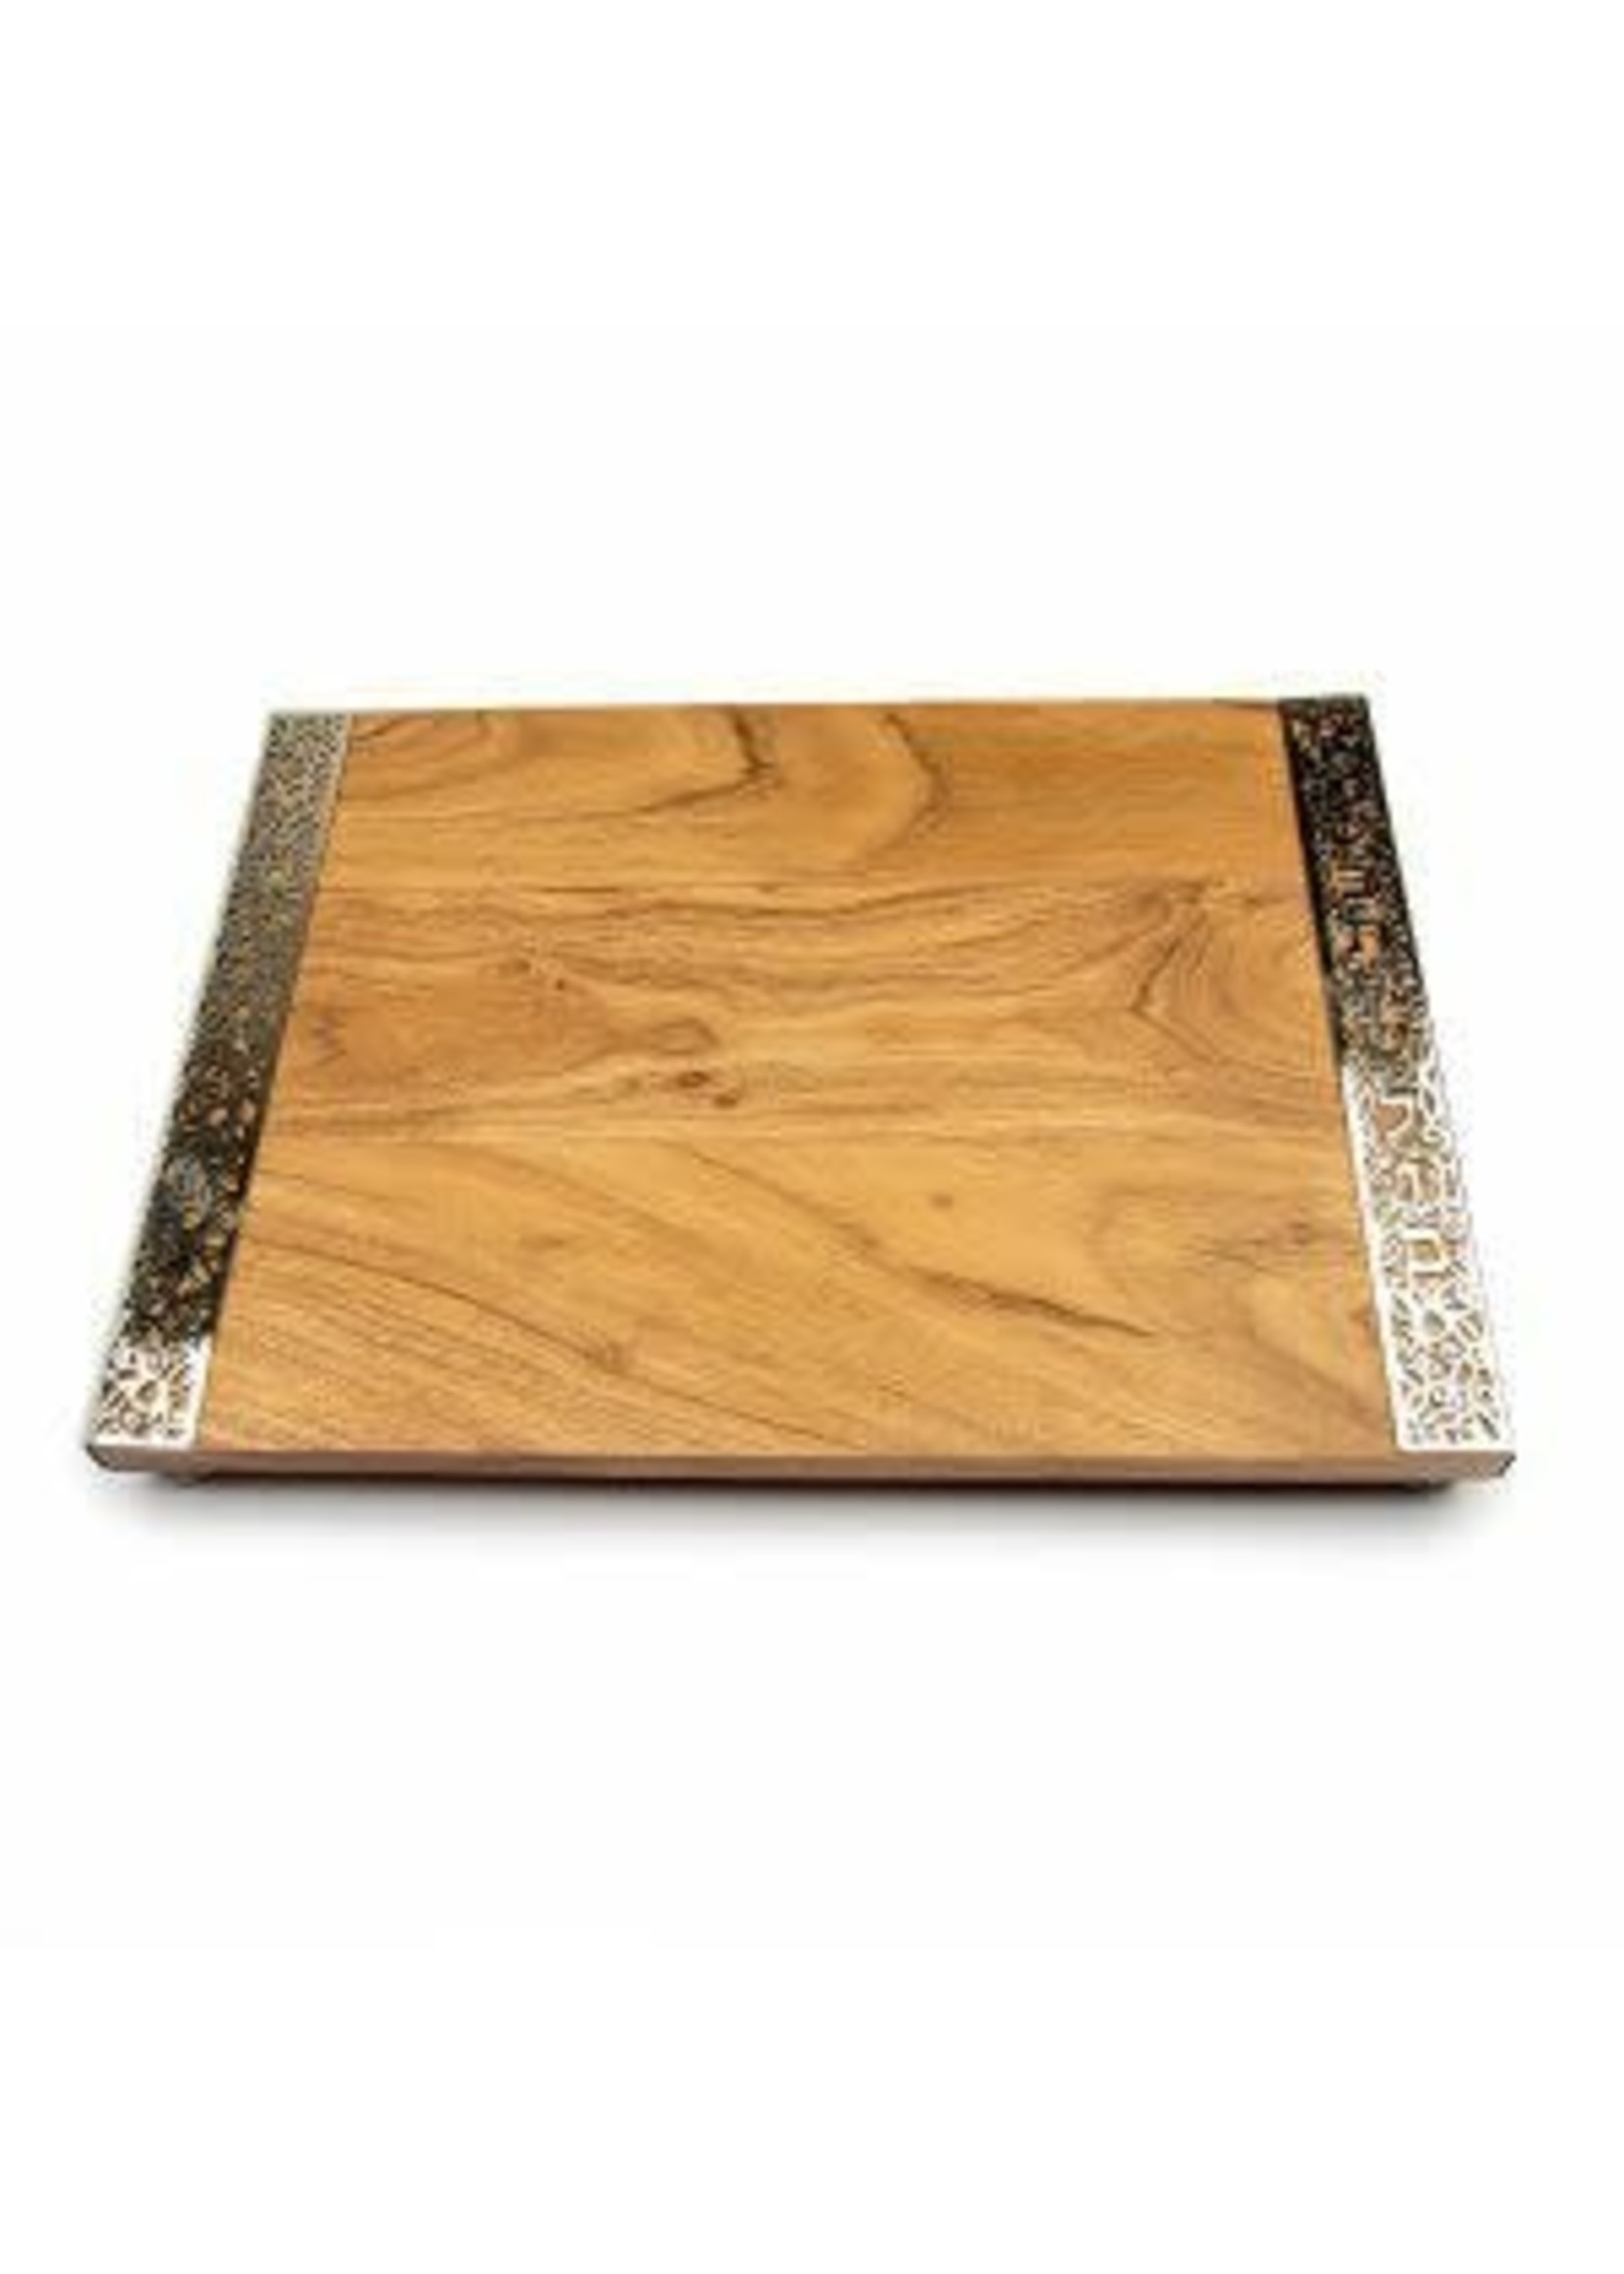 CHALLAH BOARD WOOD WITH LACE S